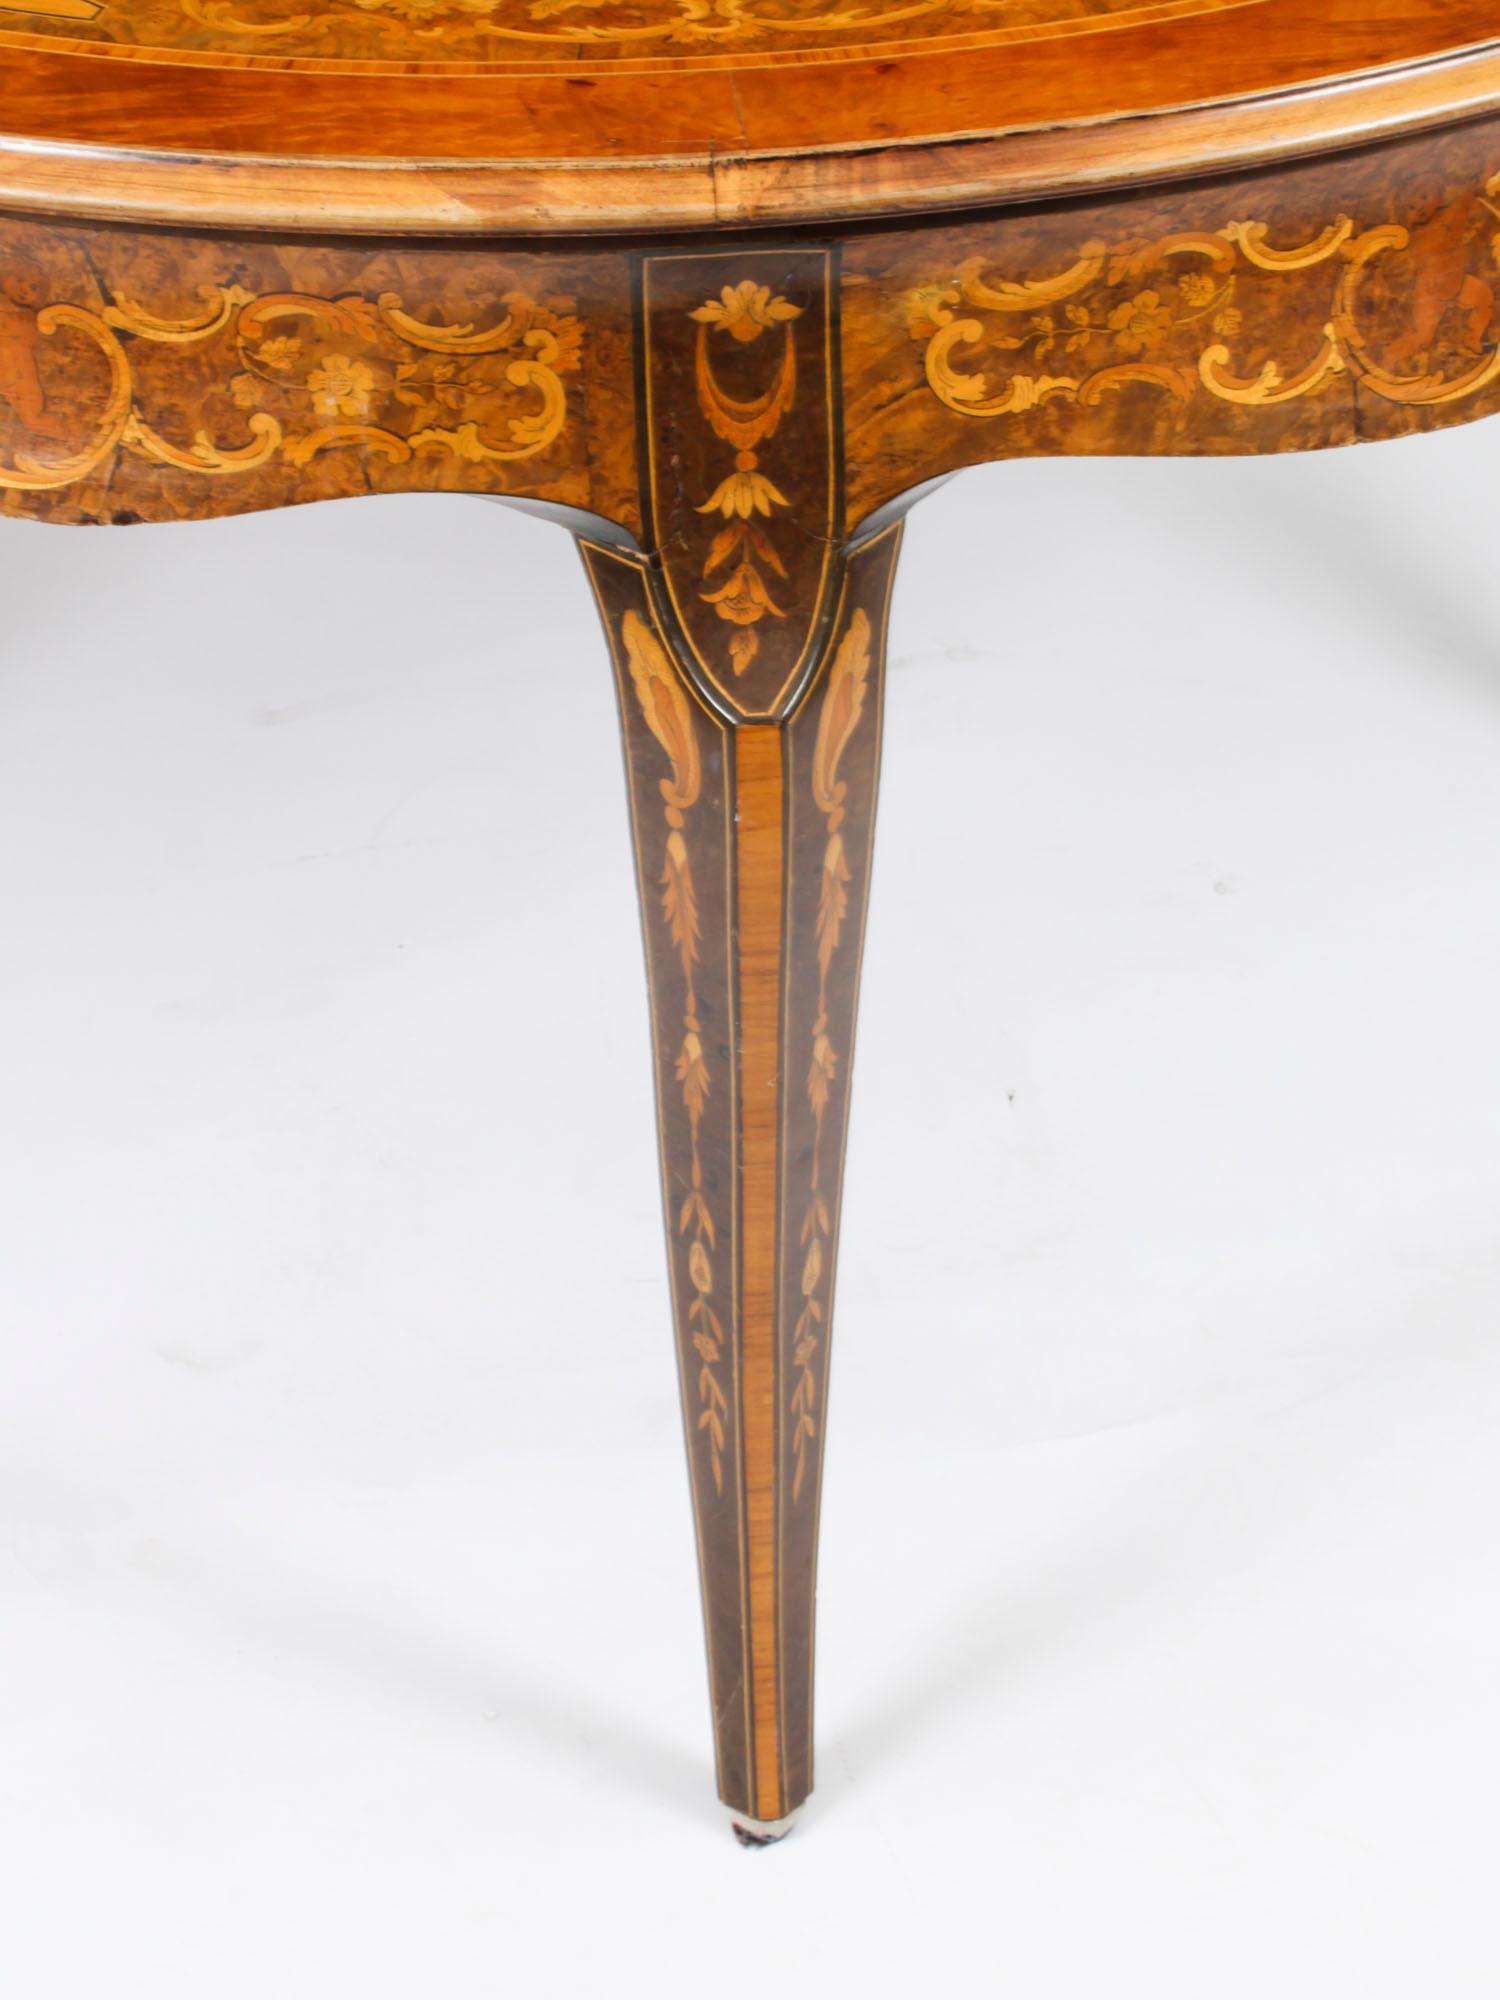 Antique Burr Walnut Marquetry Centre / Dining Table, Early 20th Century For Sale 3